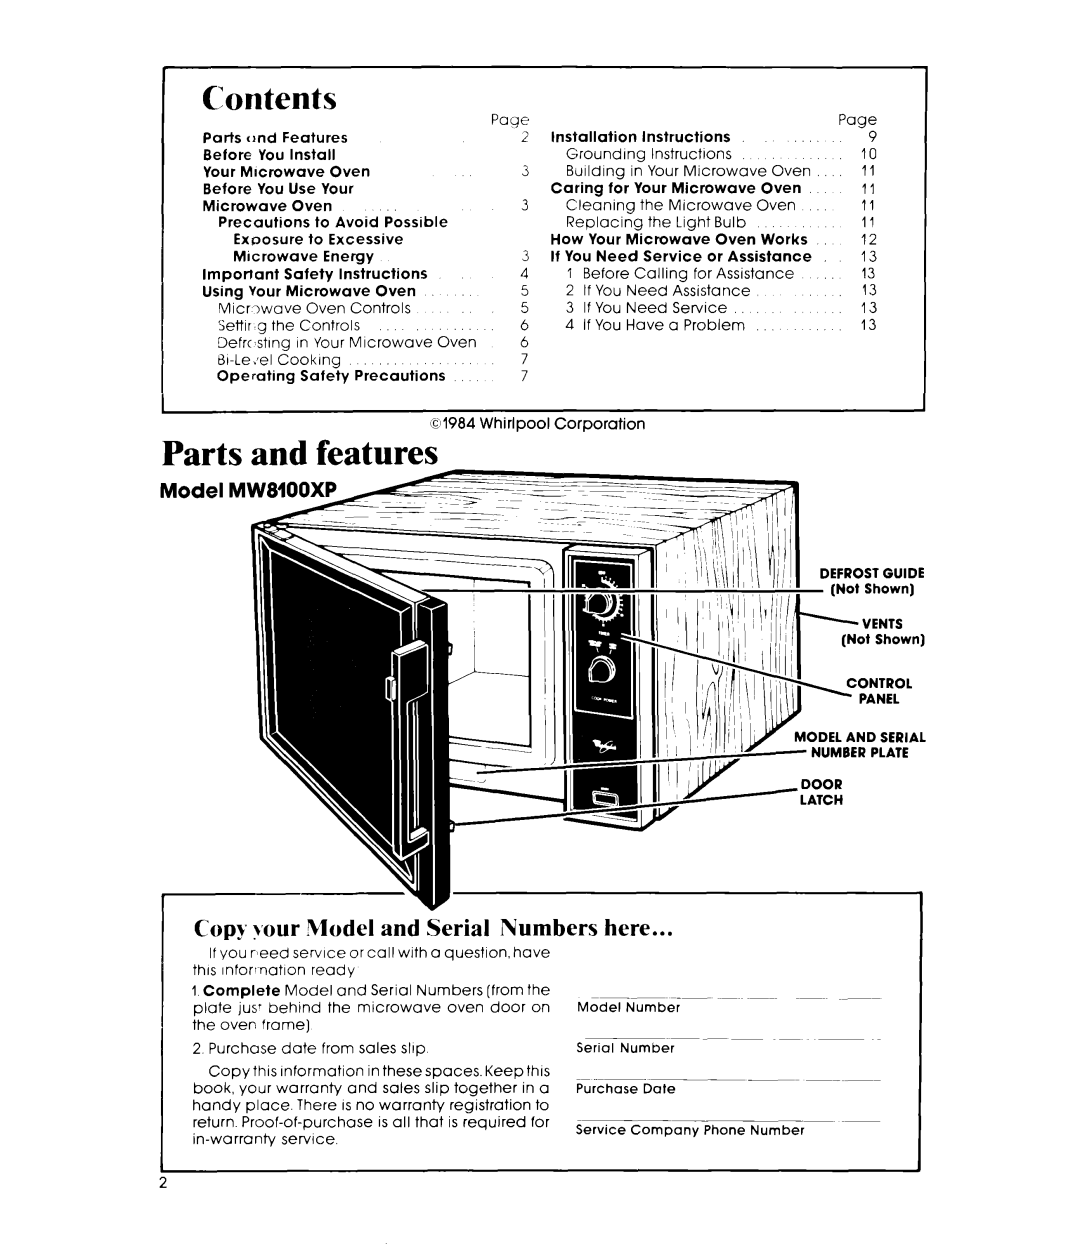 Whirlpool MW81OOXP manual Contents, Parts and features, Copy your Model and Serial Numbers here 